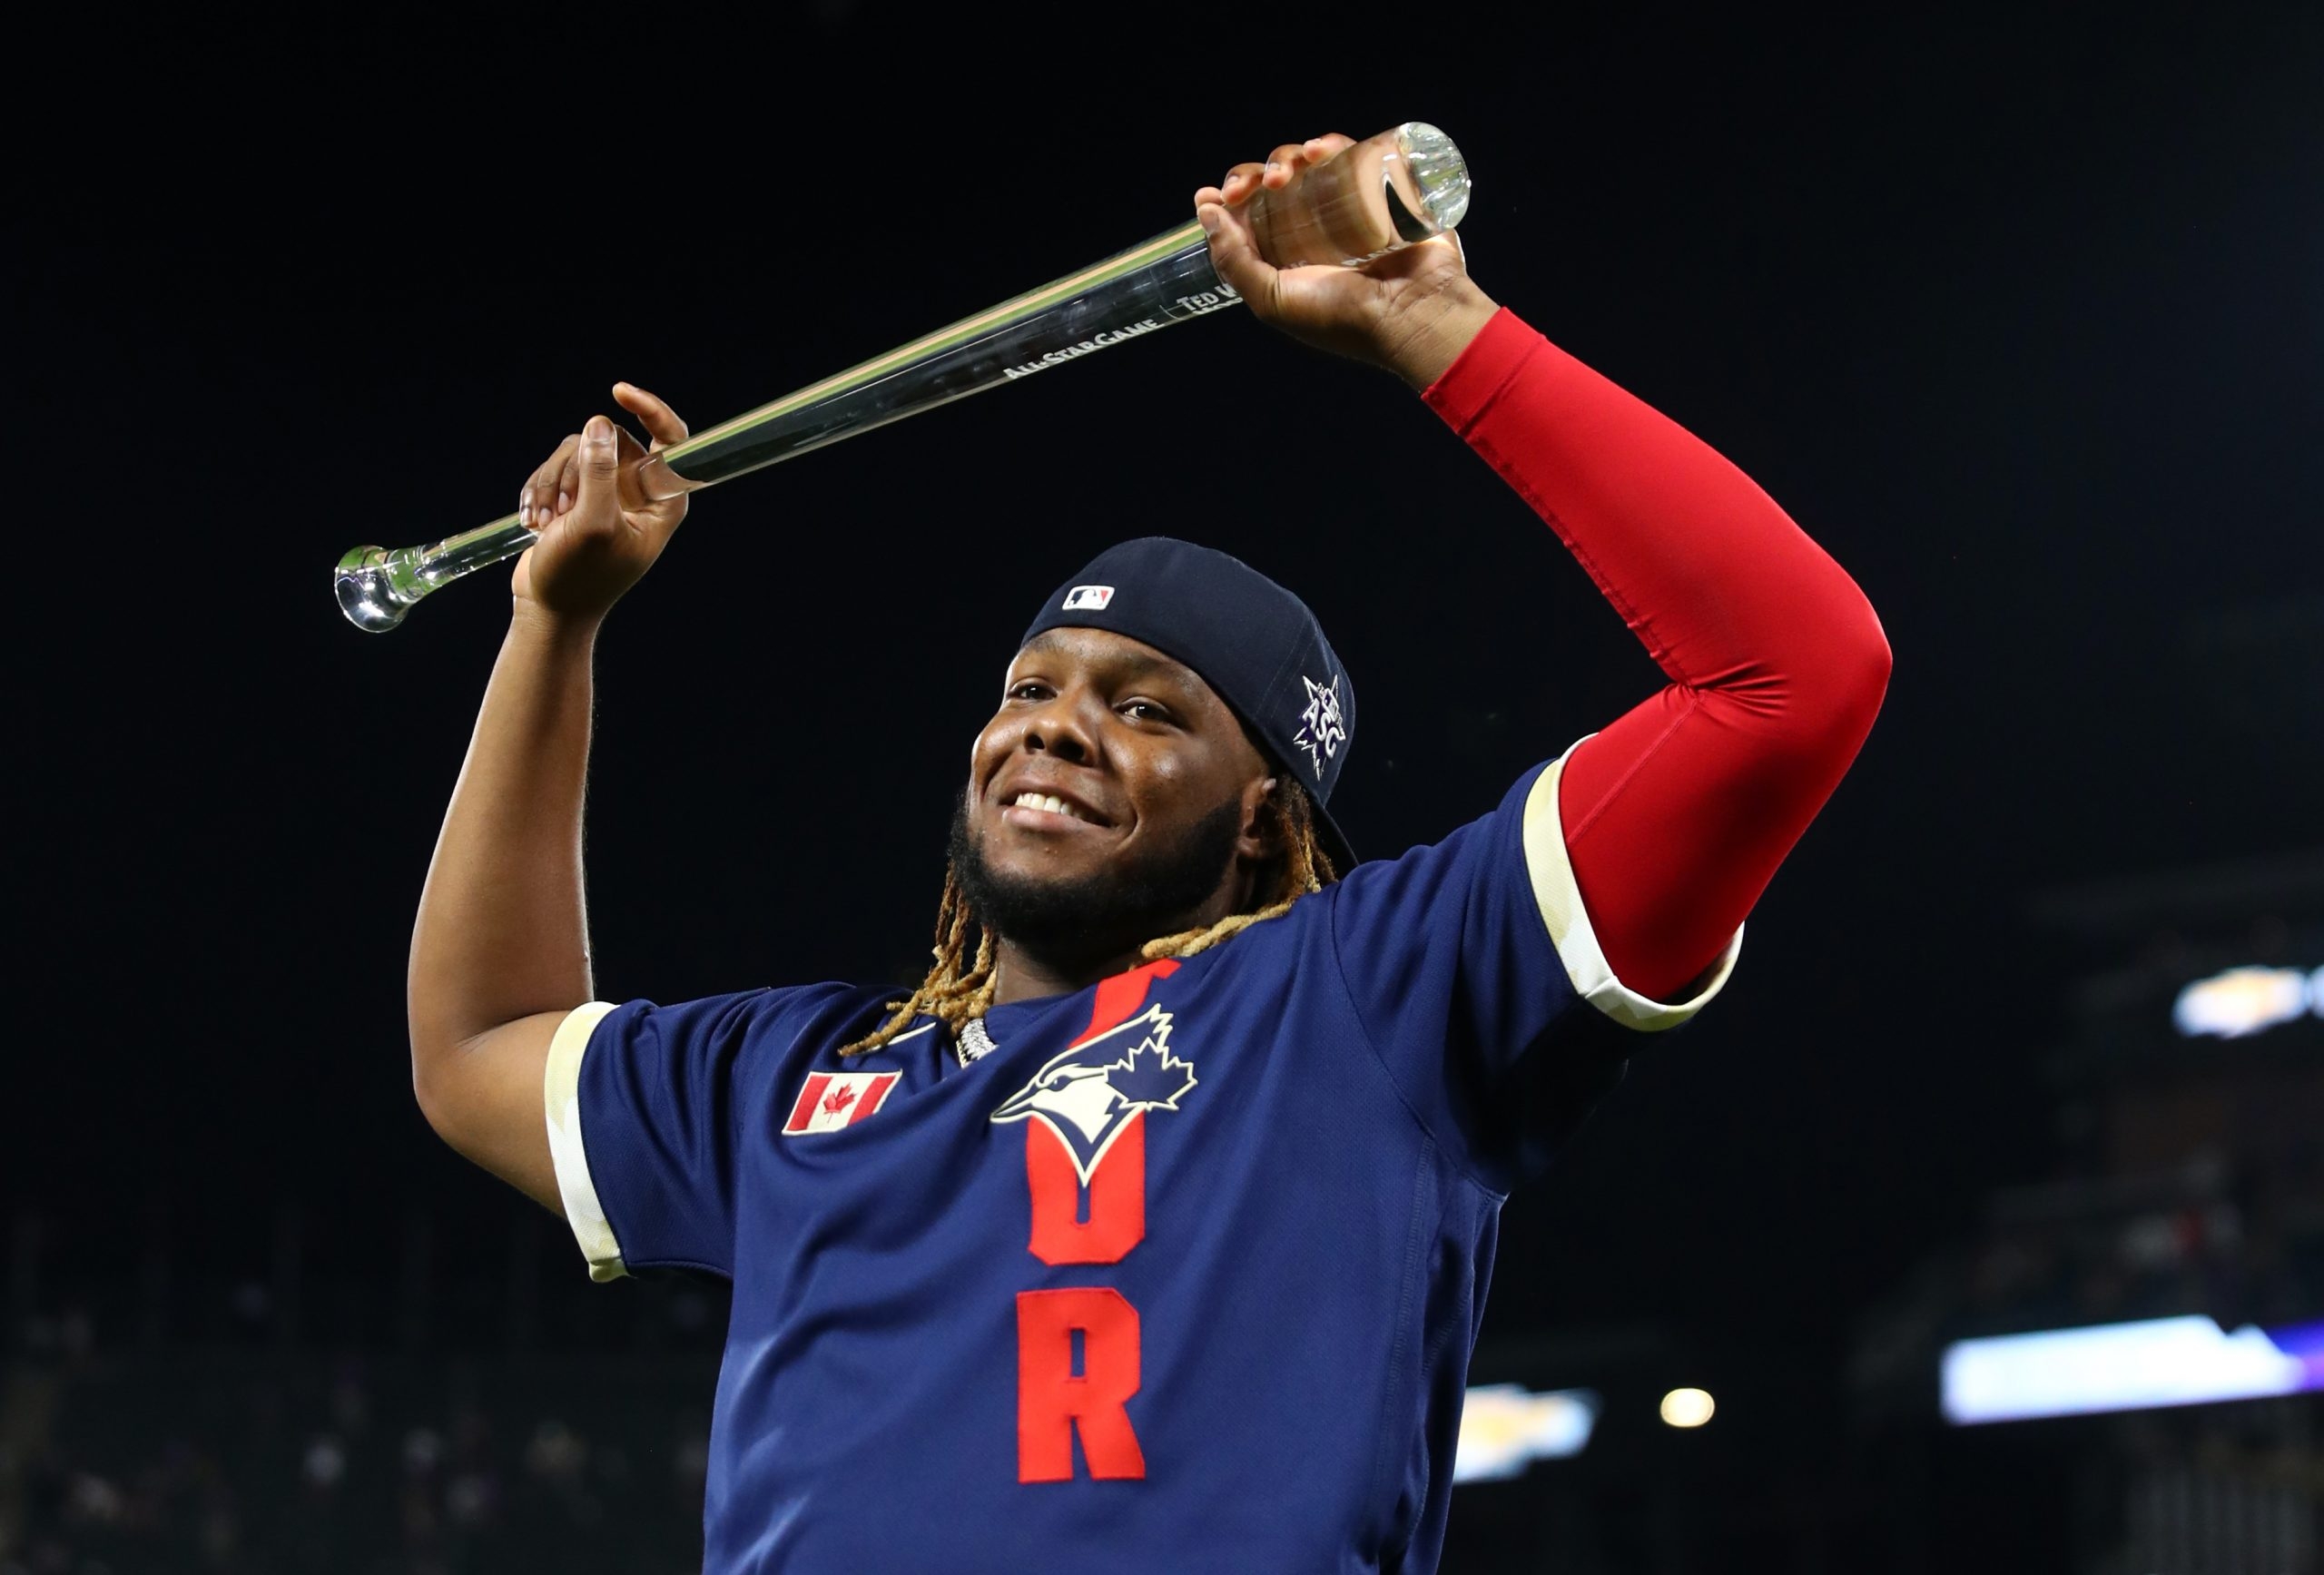 Will Vladimir Guerrero Jr. Be Even Better Than His Hall of Fame